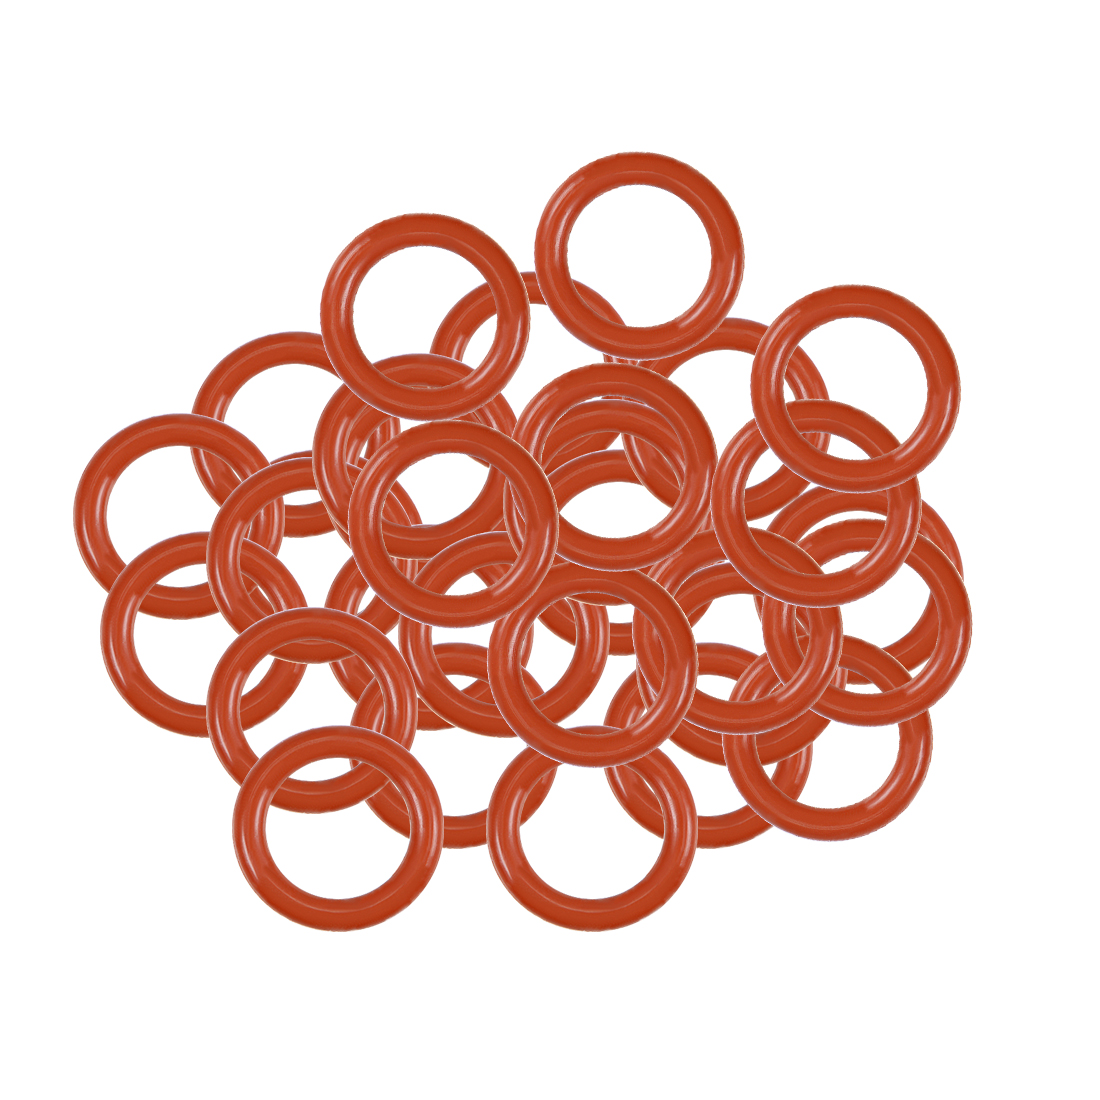 Unique Bargains Silicone O-Rings 9.5mm OD, 6.5mm ID, 1.5mm Width, Seal Gasket Red 30Pcs